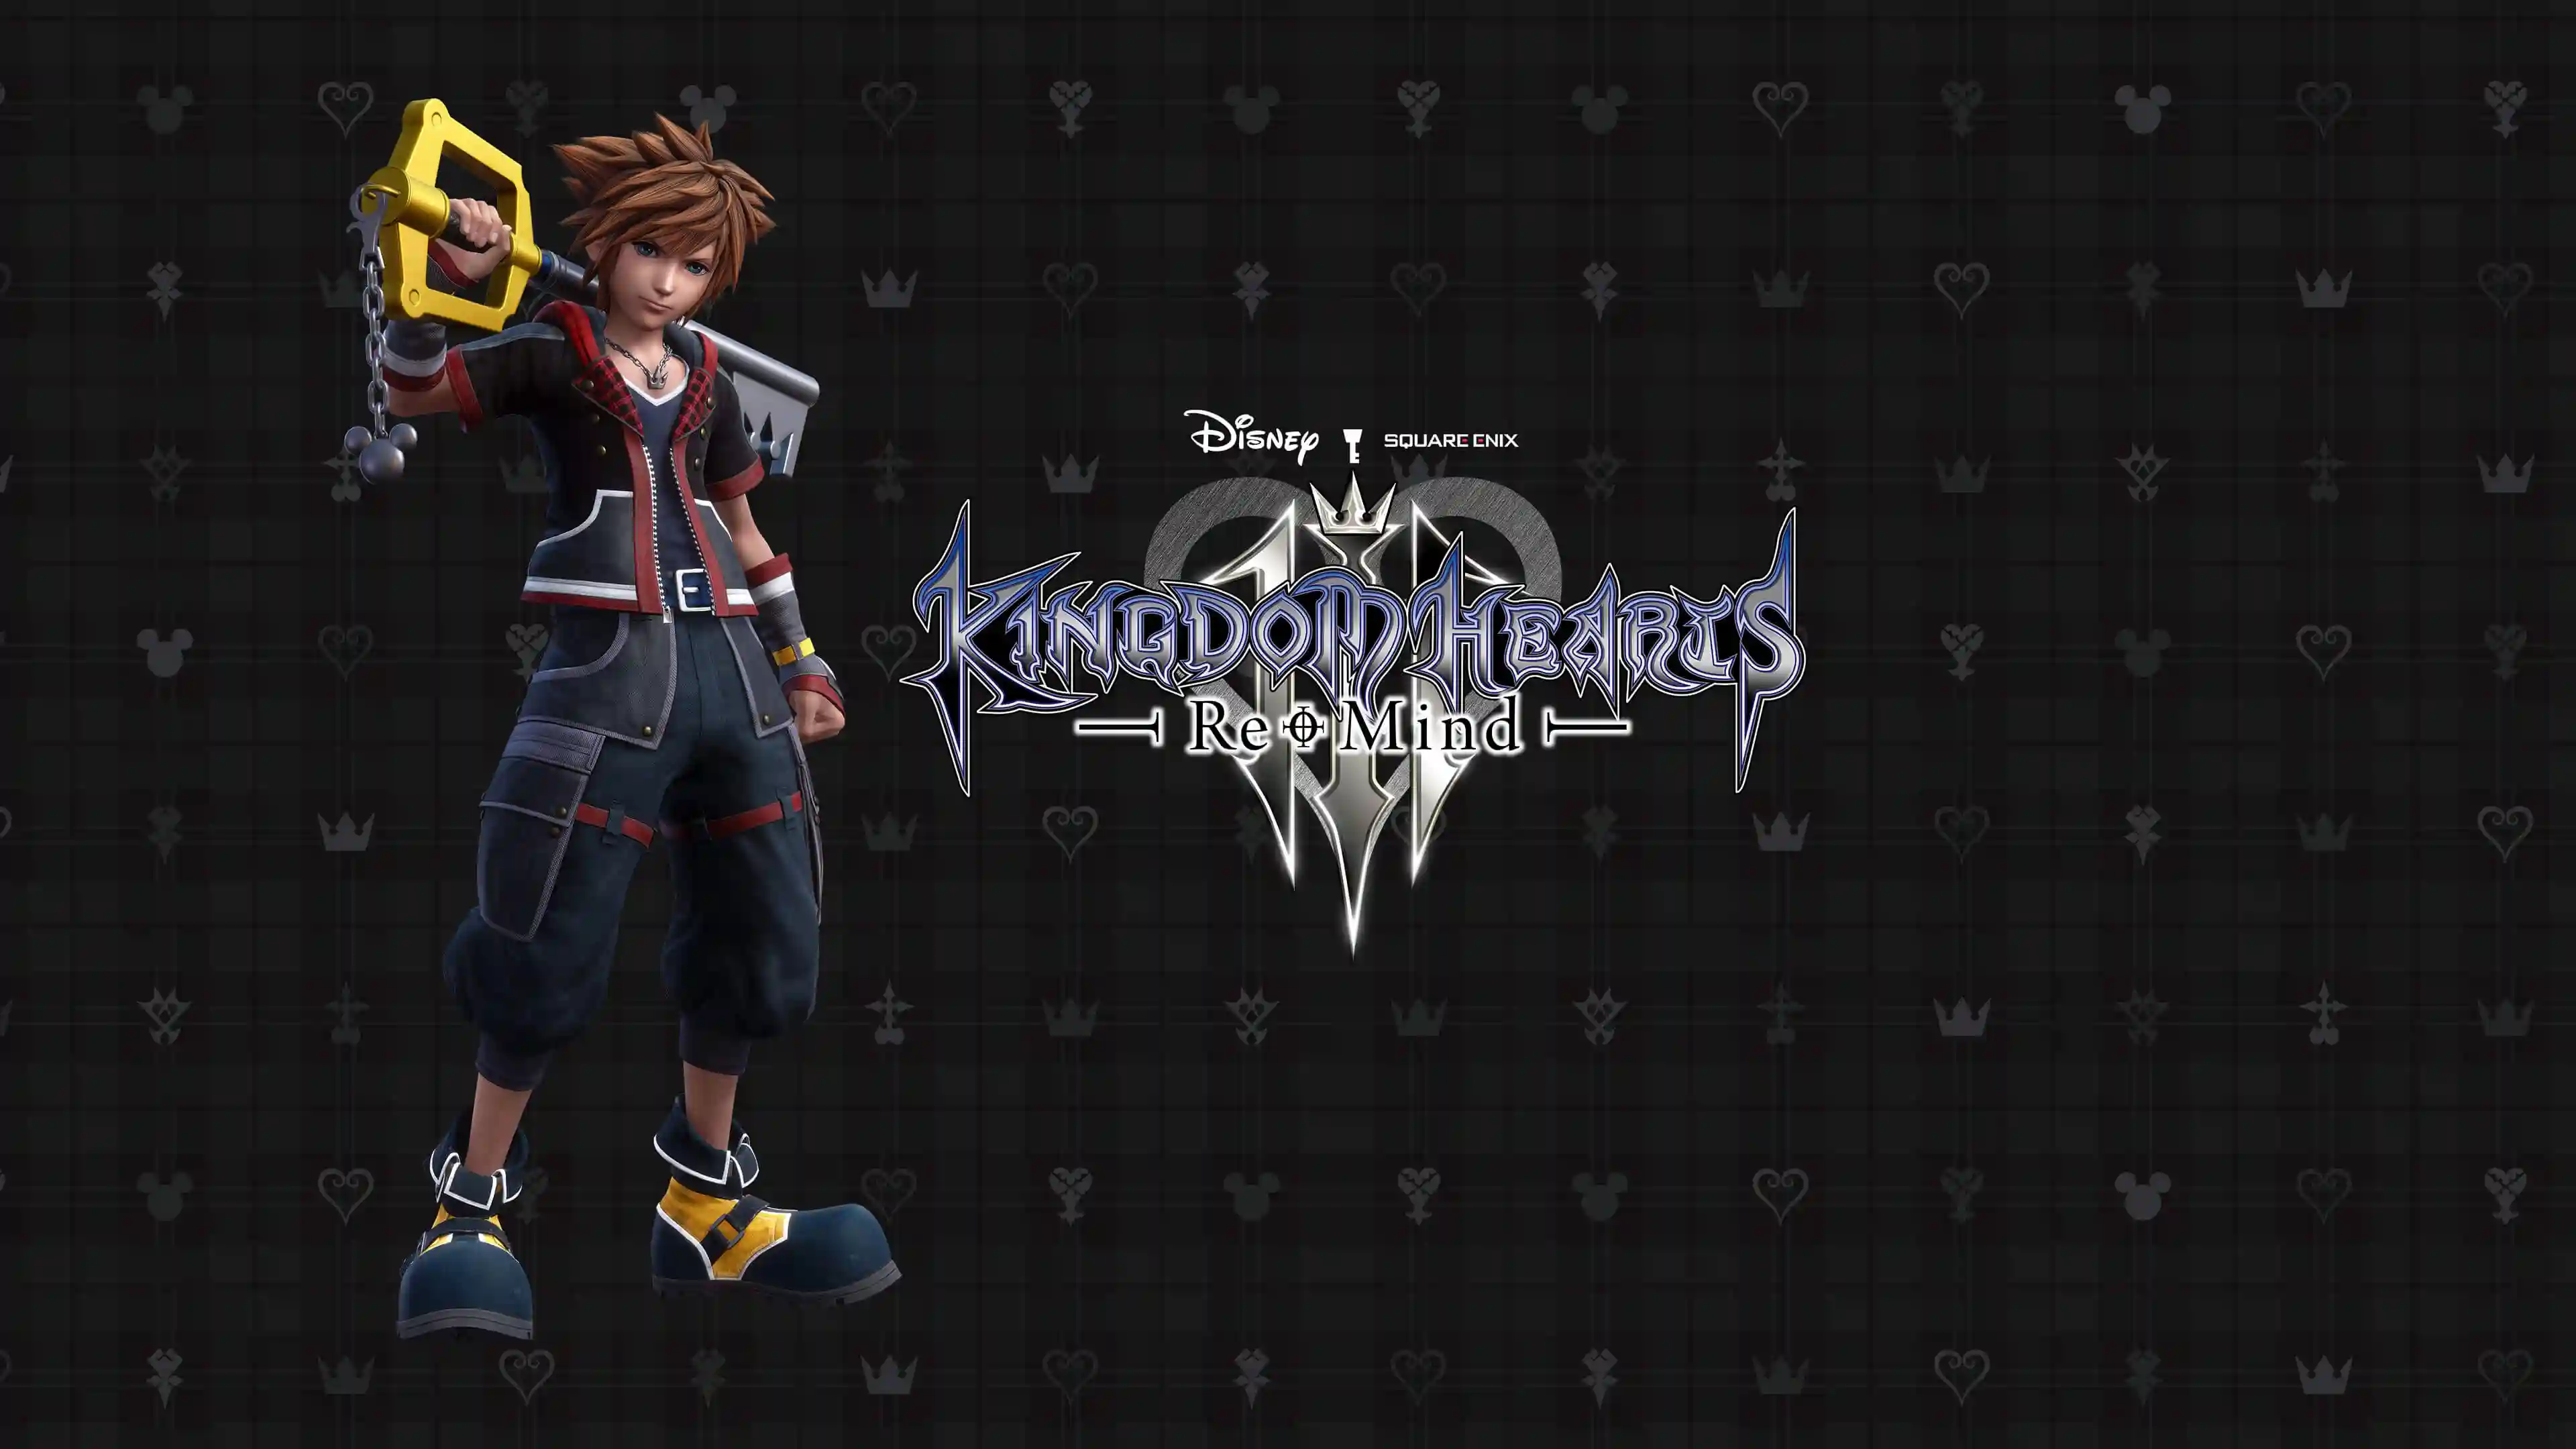 Square Enix Does Not Plan To Release Anymore Kingdom Hearts Games On a SWITCH